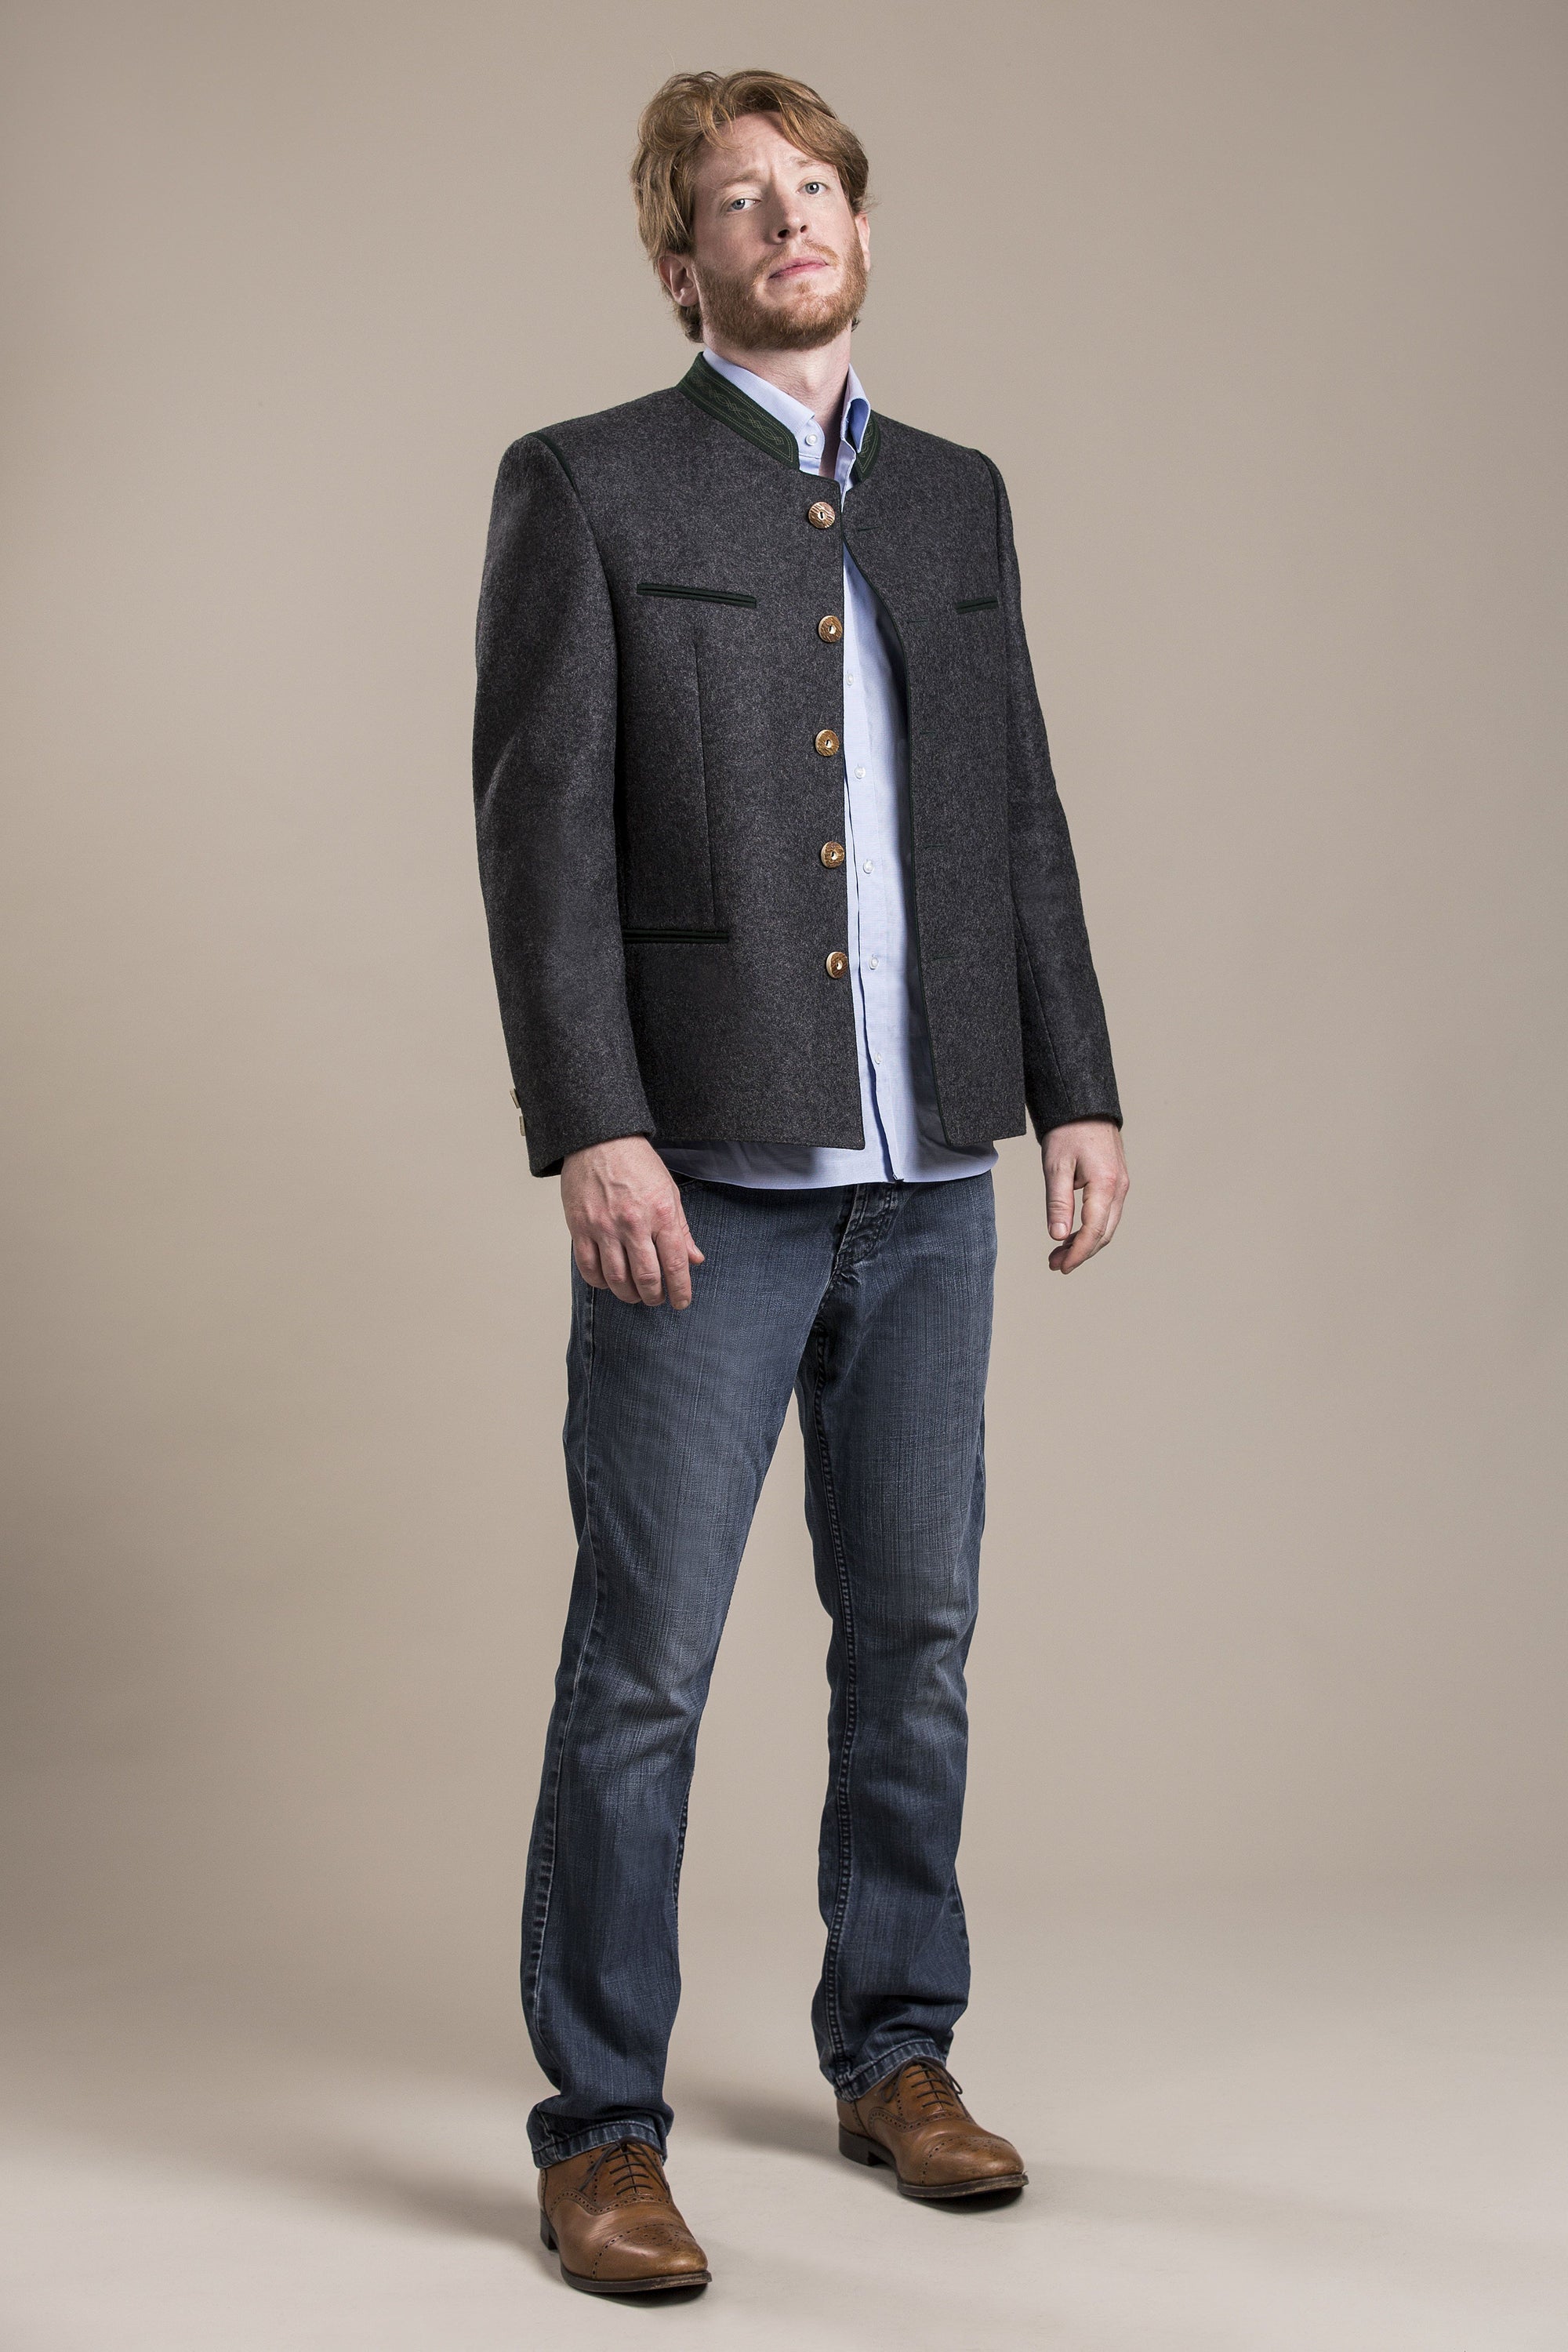 a front view of a 30 year old man wearing an austrian loden wool jacket